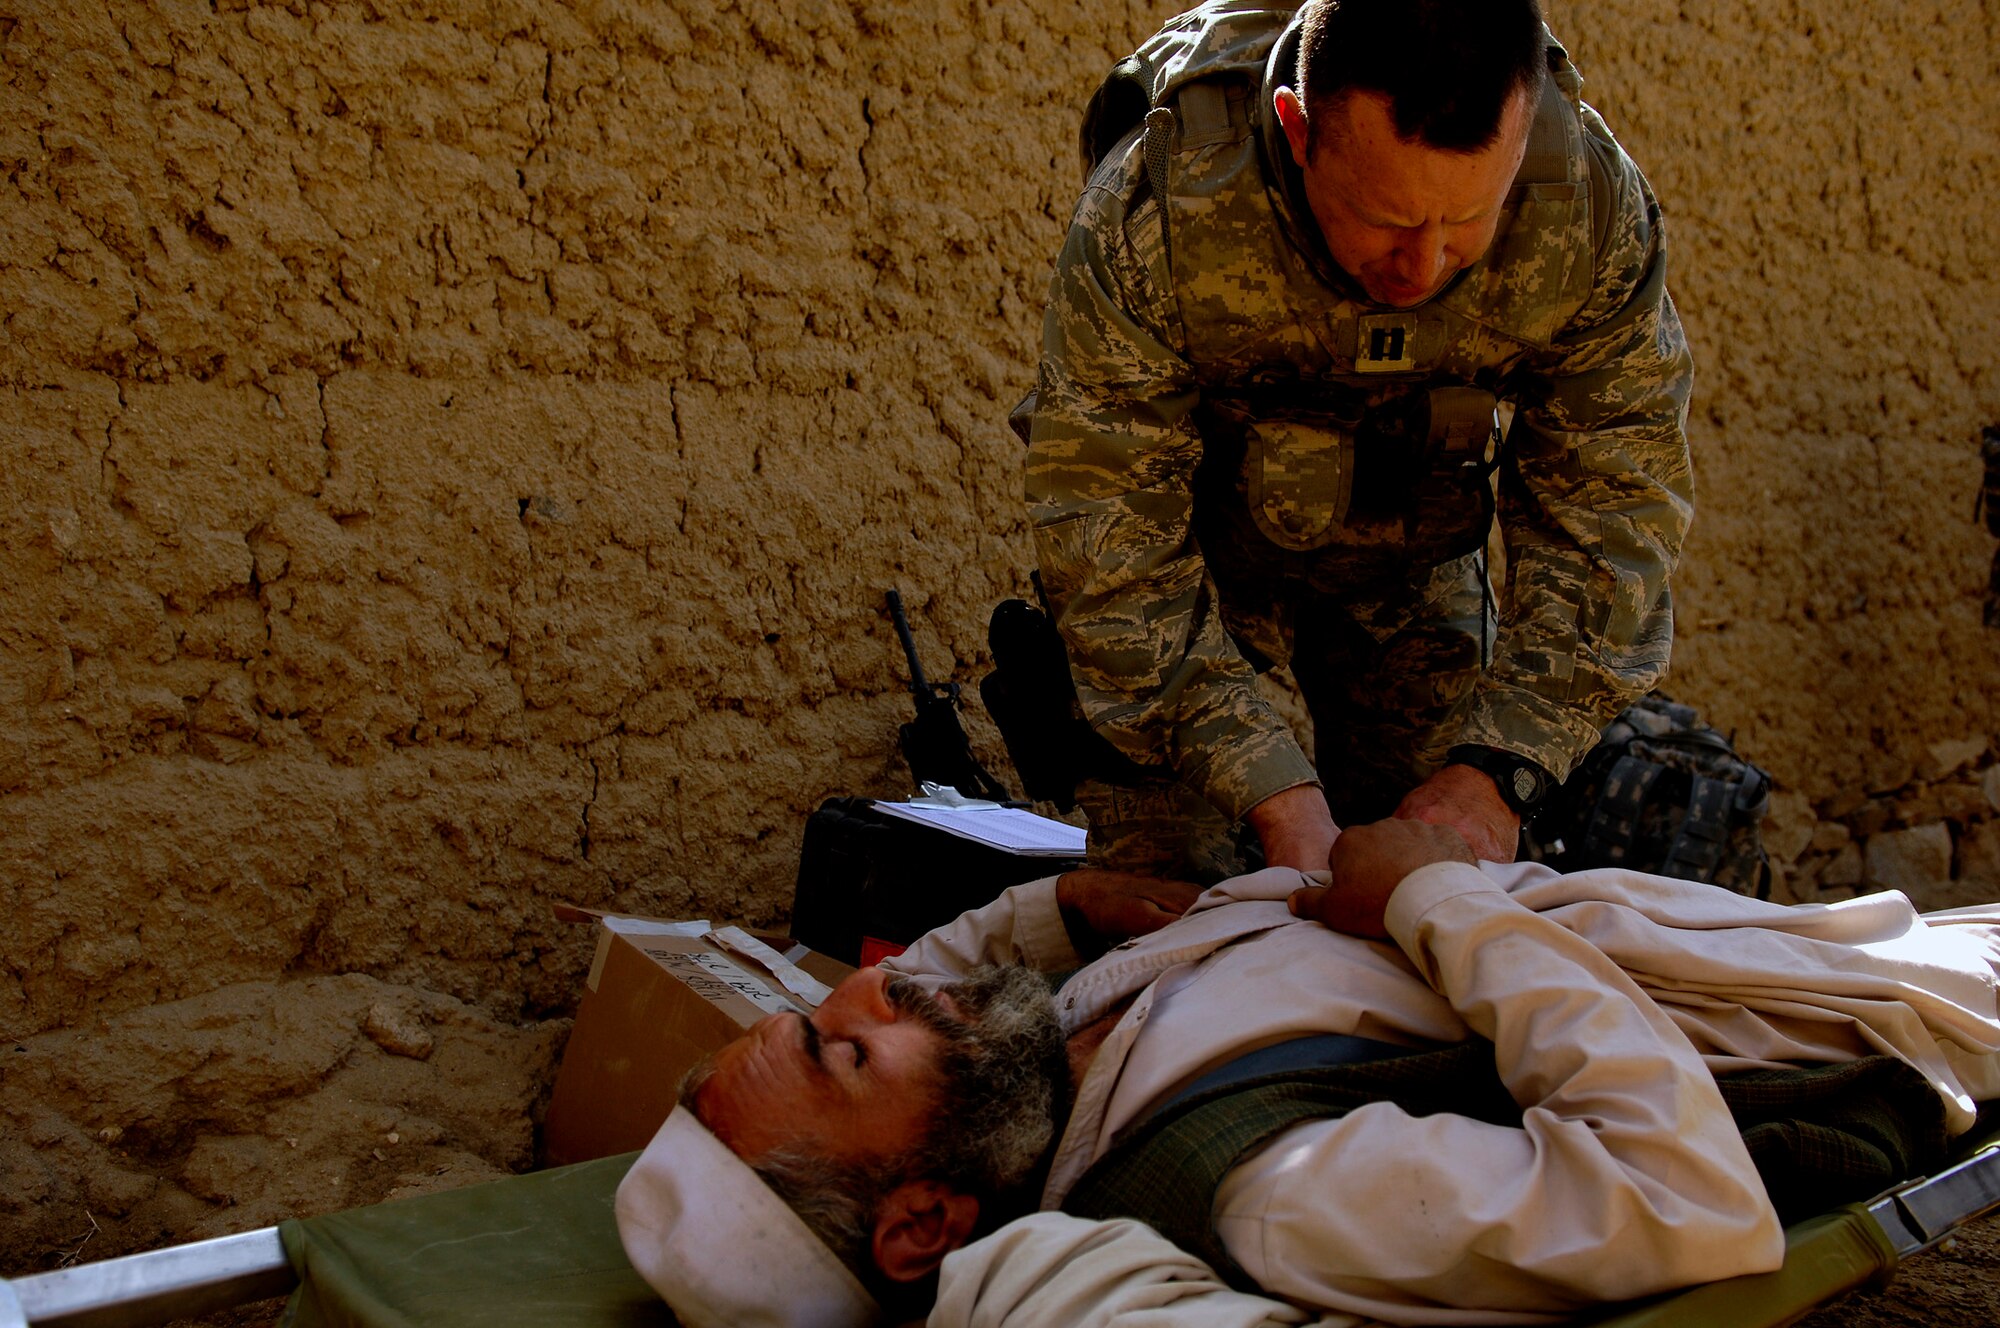 U.S. Air Force Capt. Marshall Fiscus examines a patient April 19, 2008, during a Village Medical Outreach at the Joybar village conducted by the Provincial Reconstruction Team, Bagram Air Field Afghanistan. Fiscus is the Chief Medical Officer assigned to the PRT and is deployed from Geilenkirchen, Germany. (U.S. Air Force photo by Master Sgt. Andy Dunaway) (Released)
